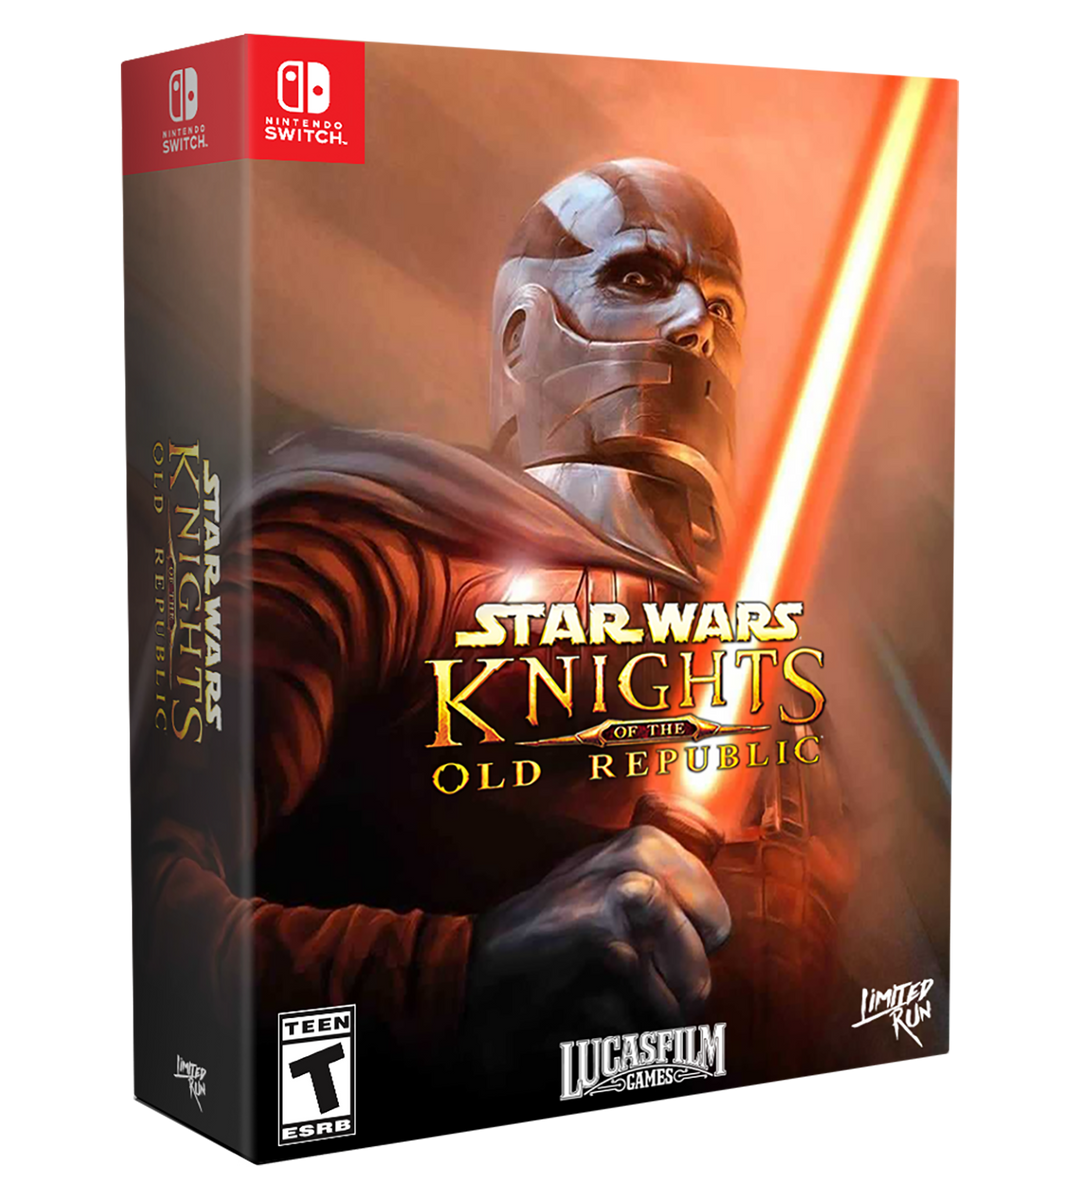 Star Wars Games That Should Be Ported To Switch